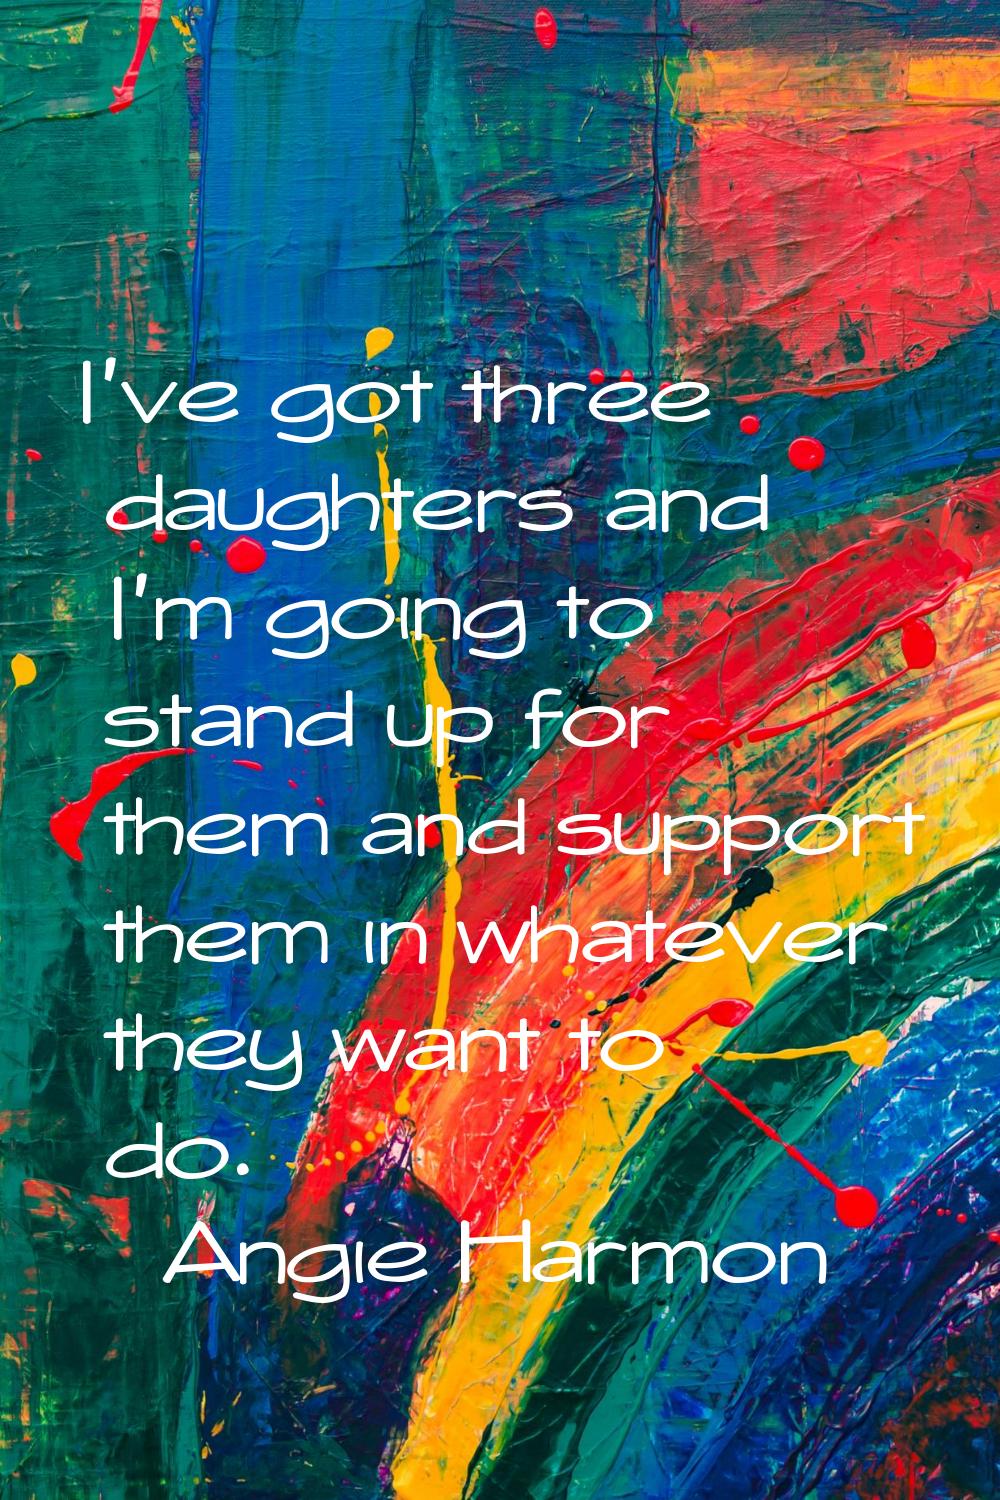 I've got three daughters and I'm going to stand up for them and support them in whatever they want 